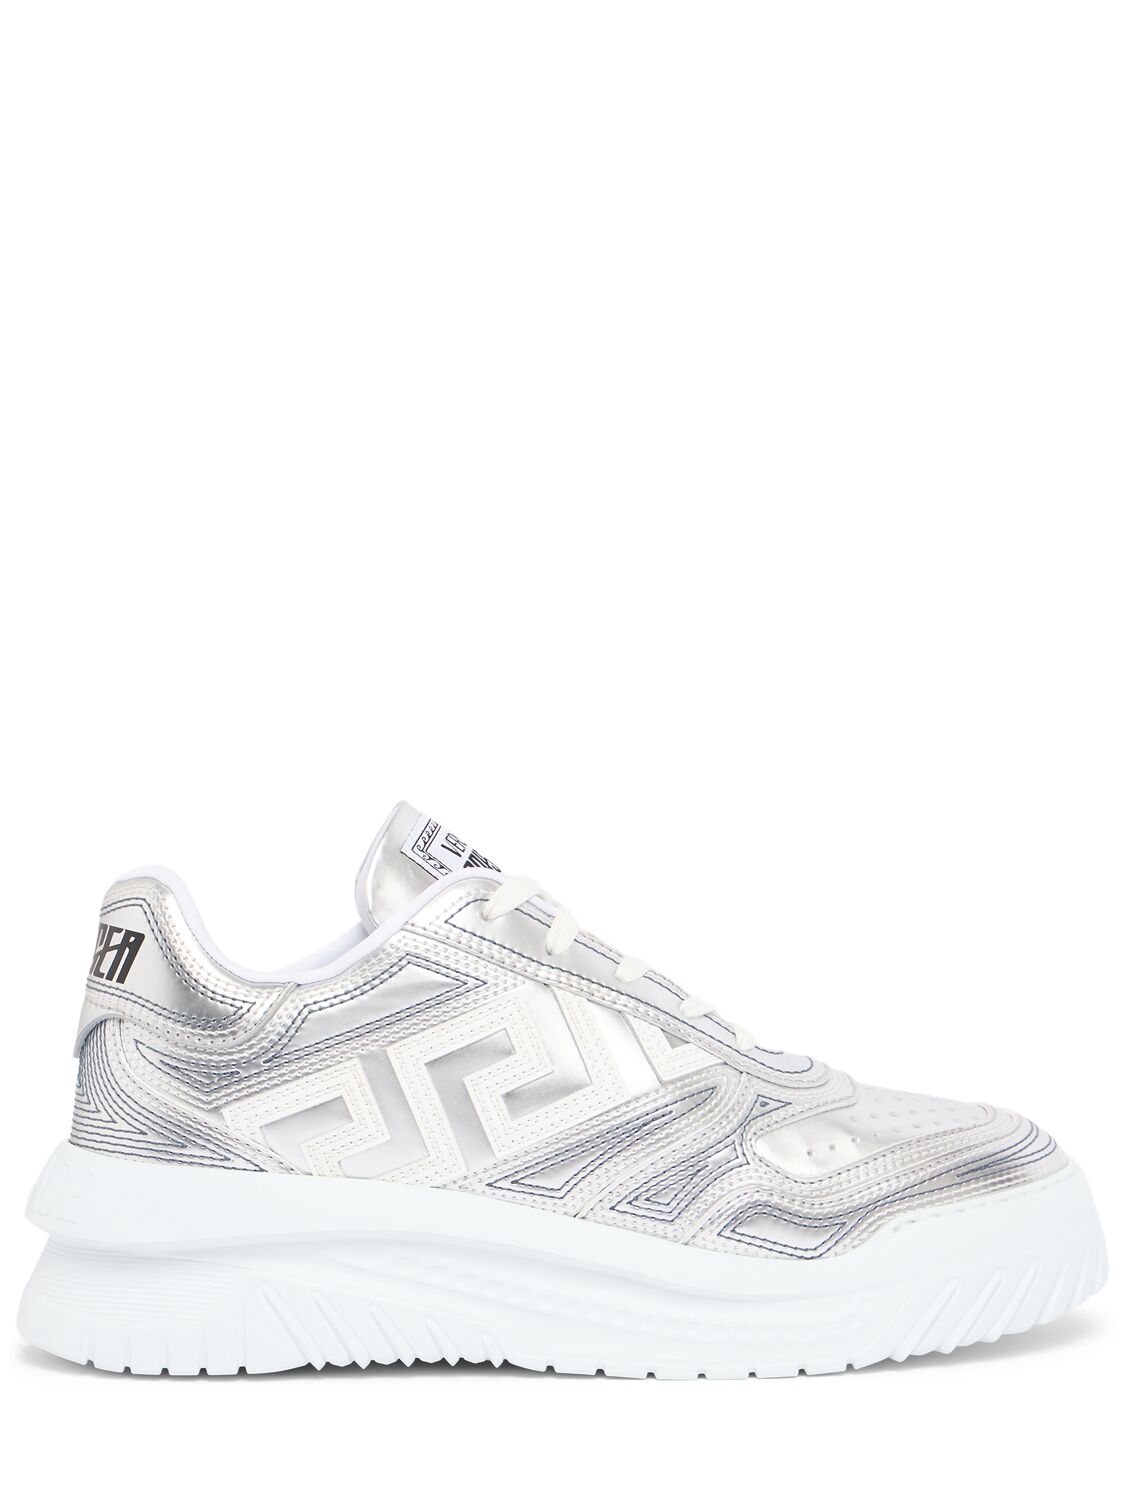 Image of Odissea Low Top Sneakers